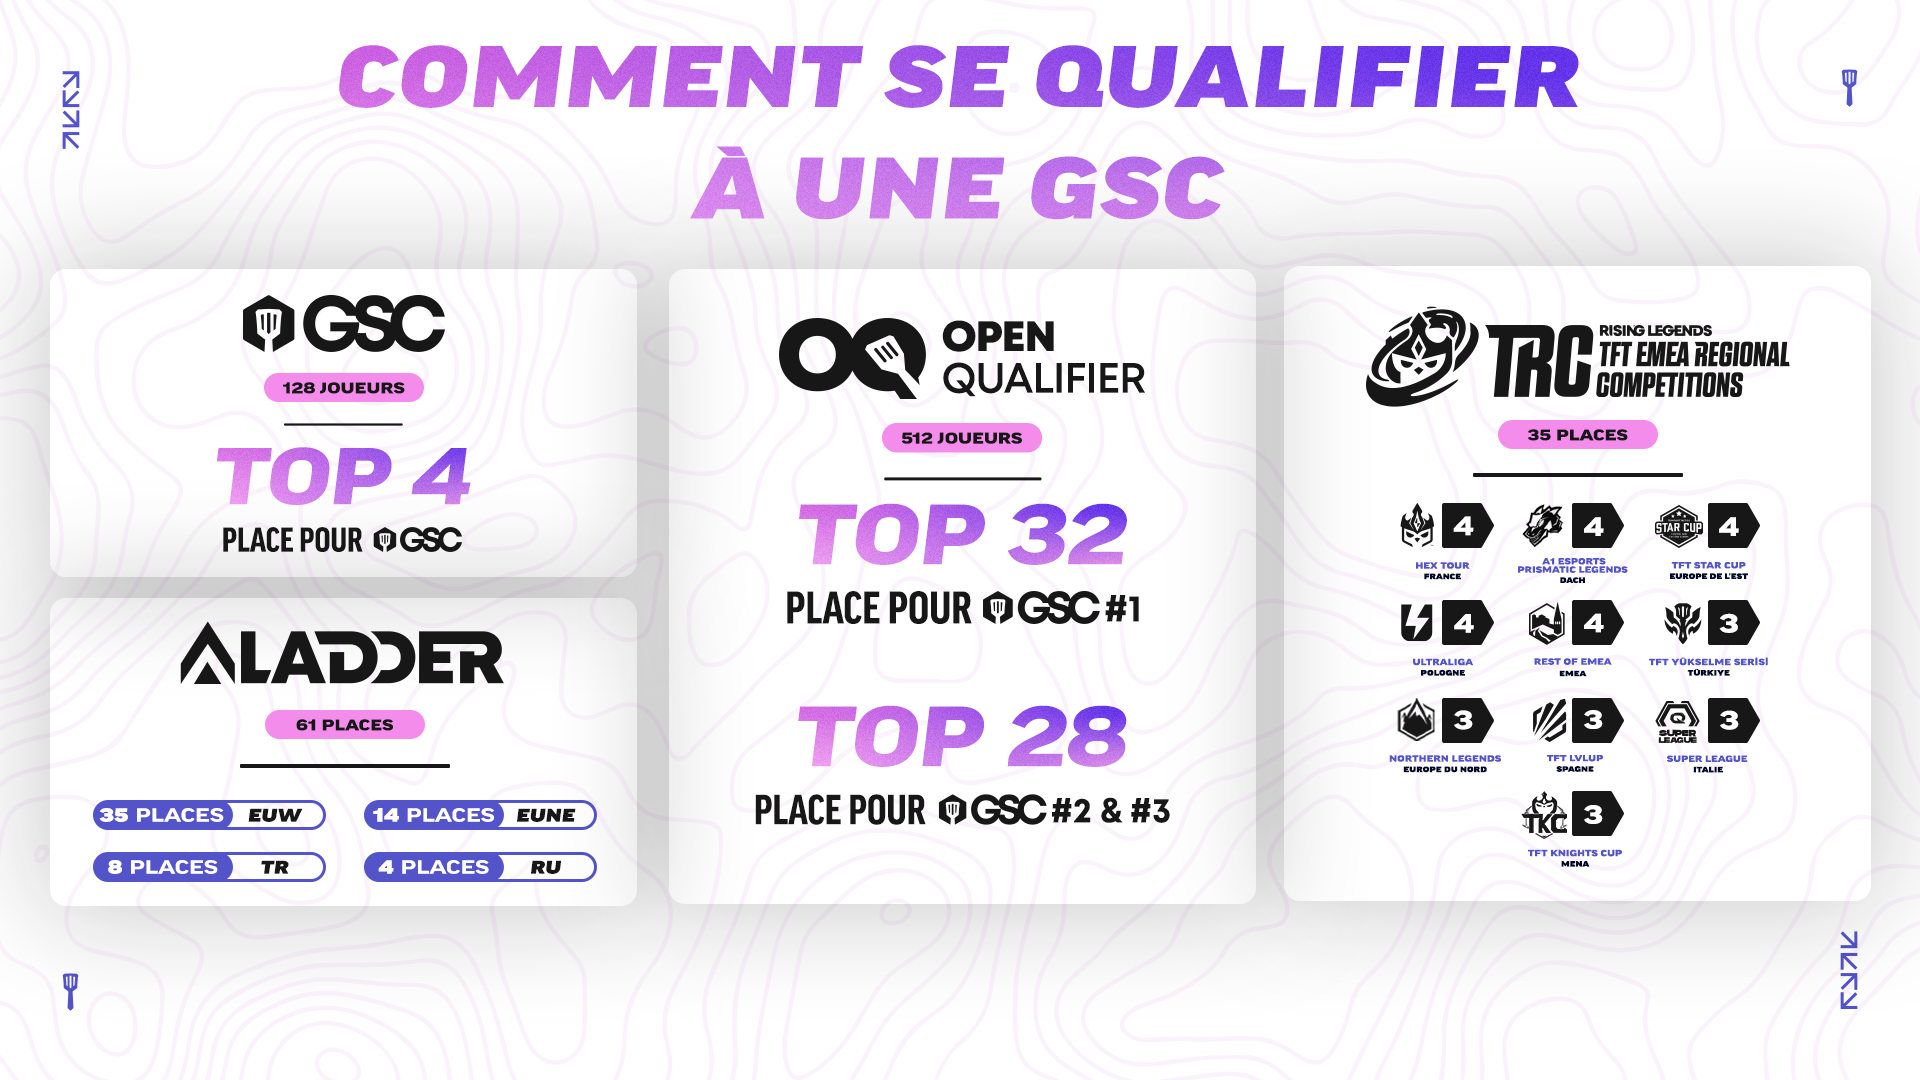 HOW_TO_QUALIFY_FR.png